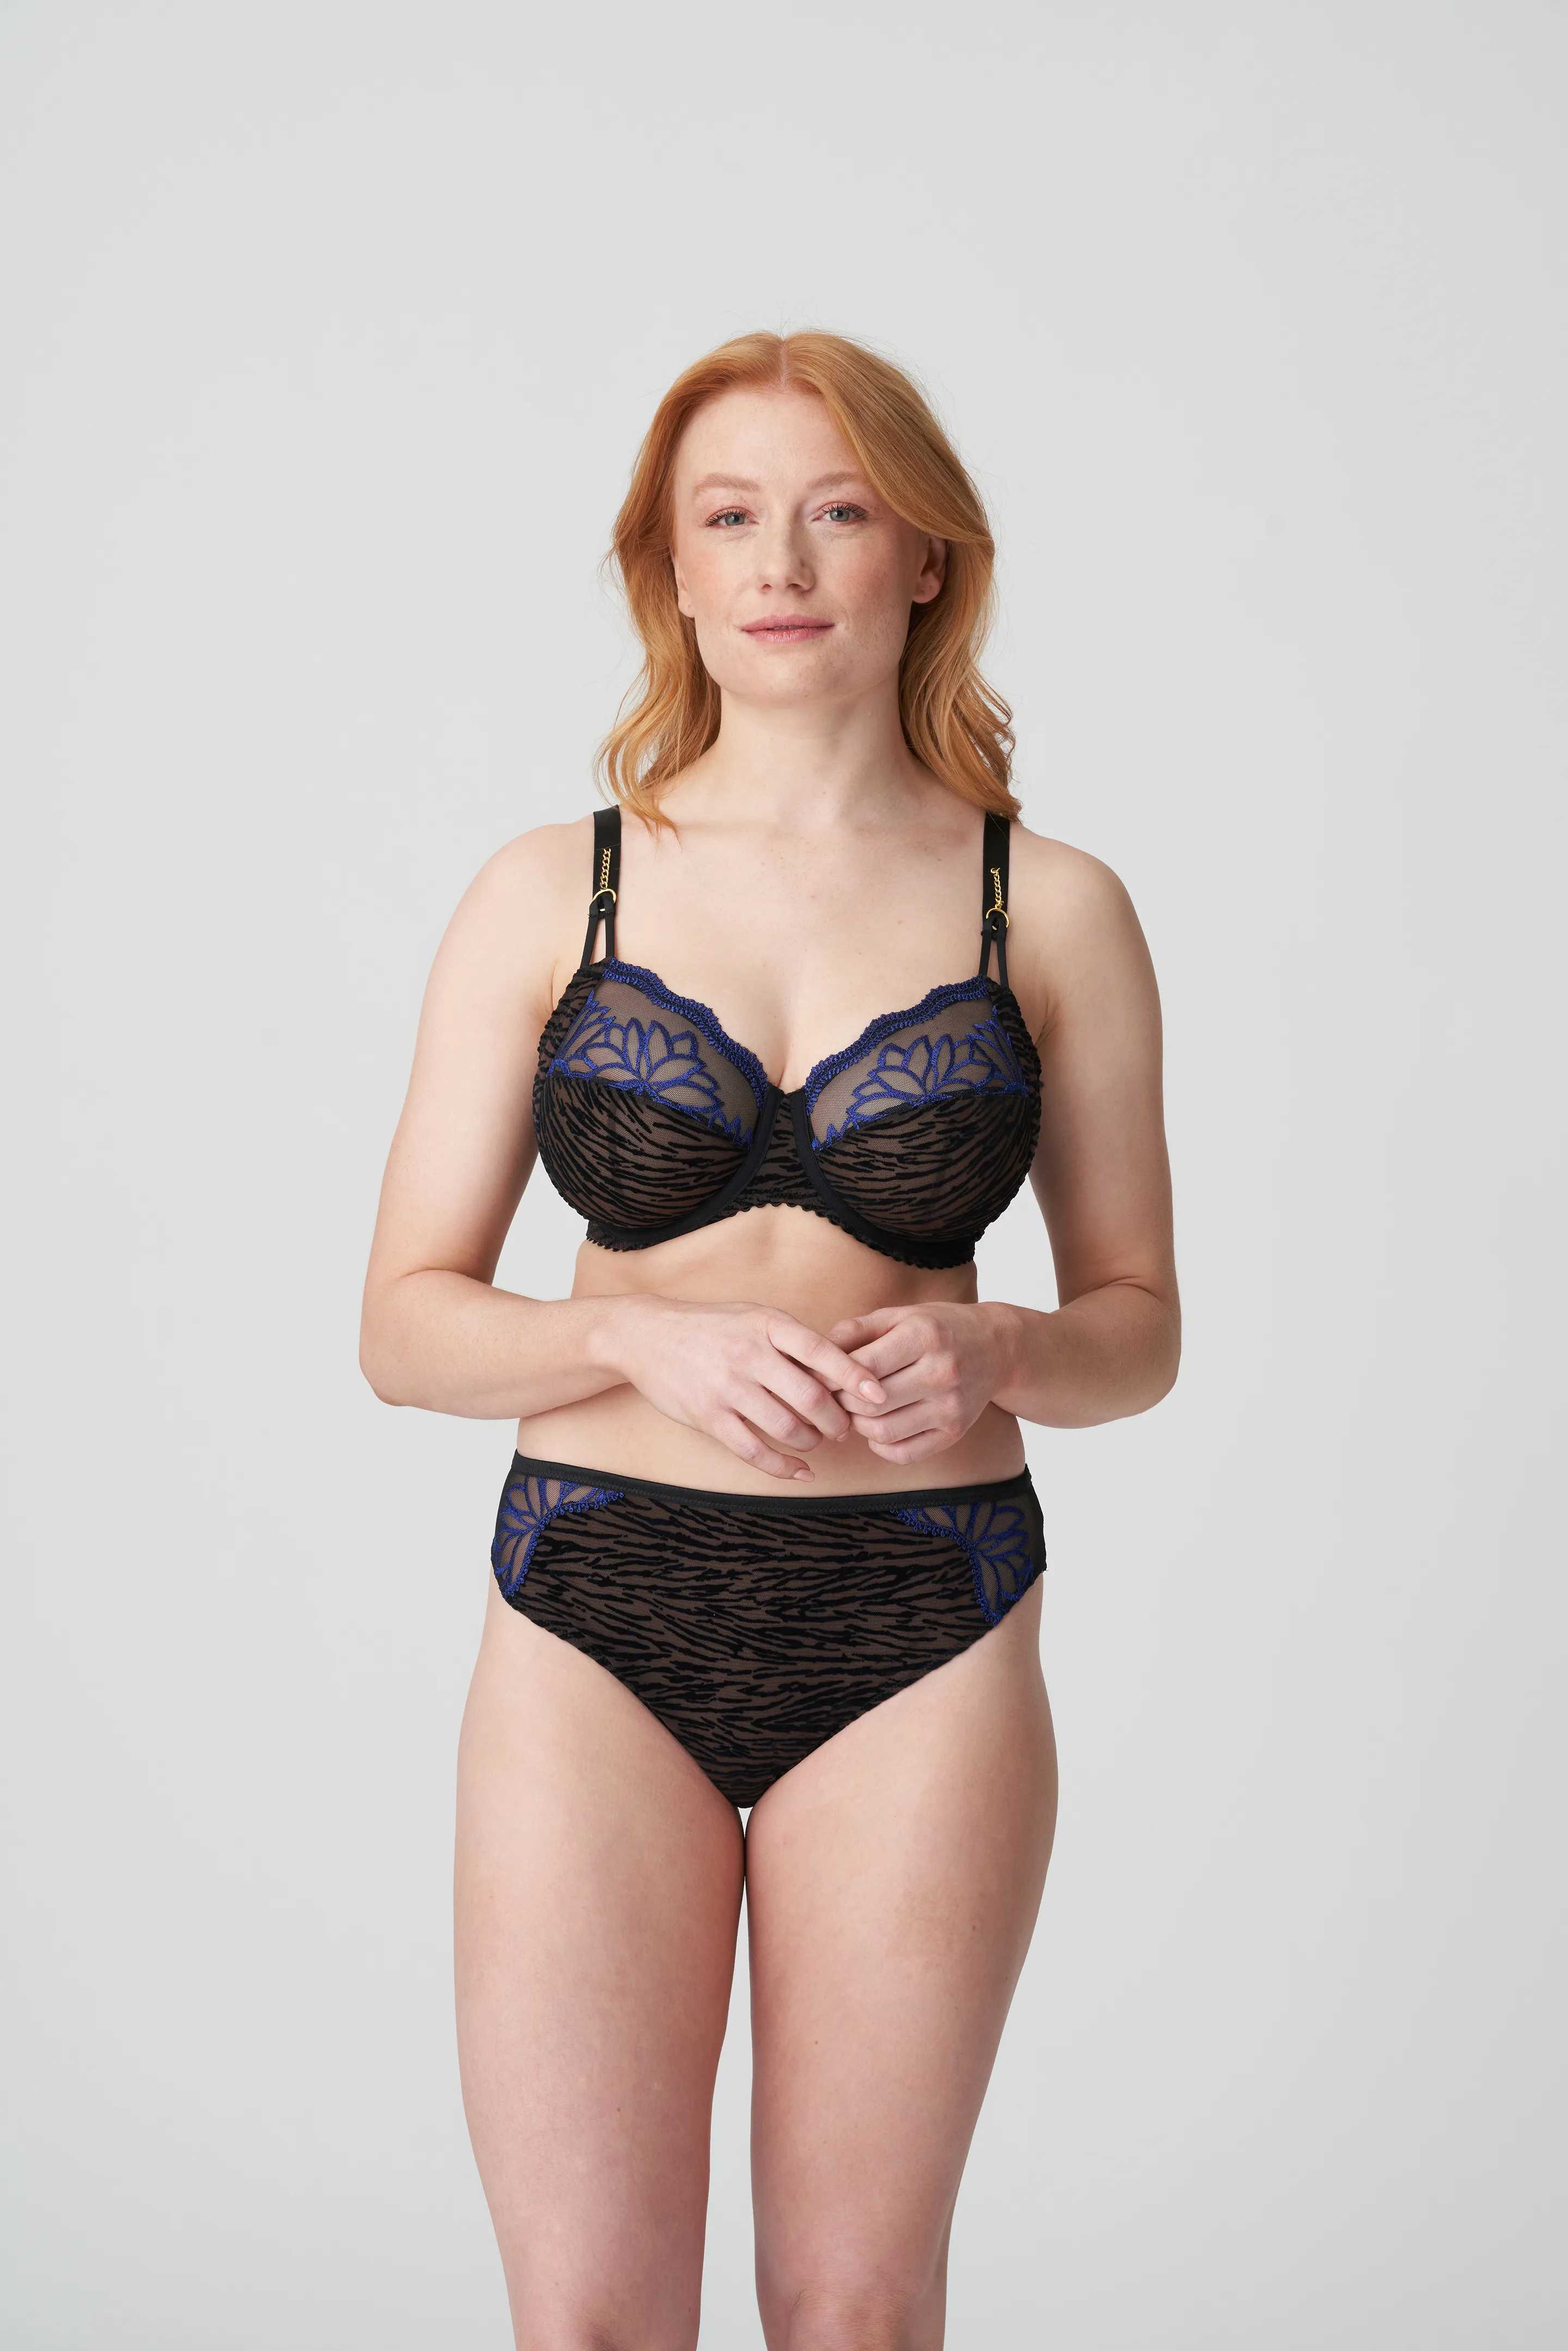 Big Cup Embroidered Non-wired Bra Plus Size Full Coverage